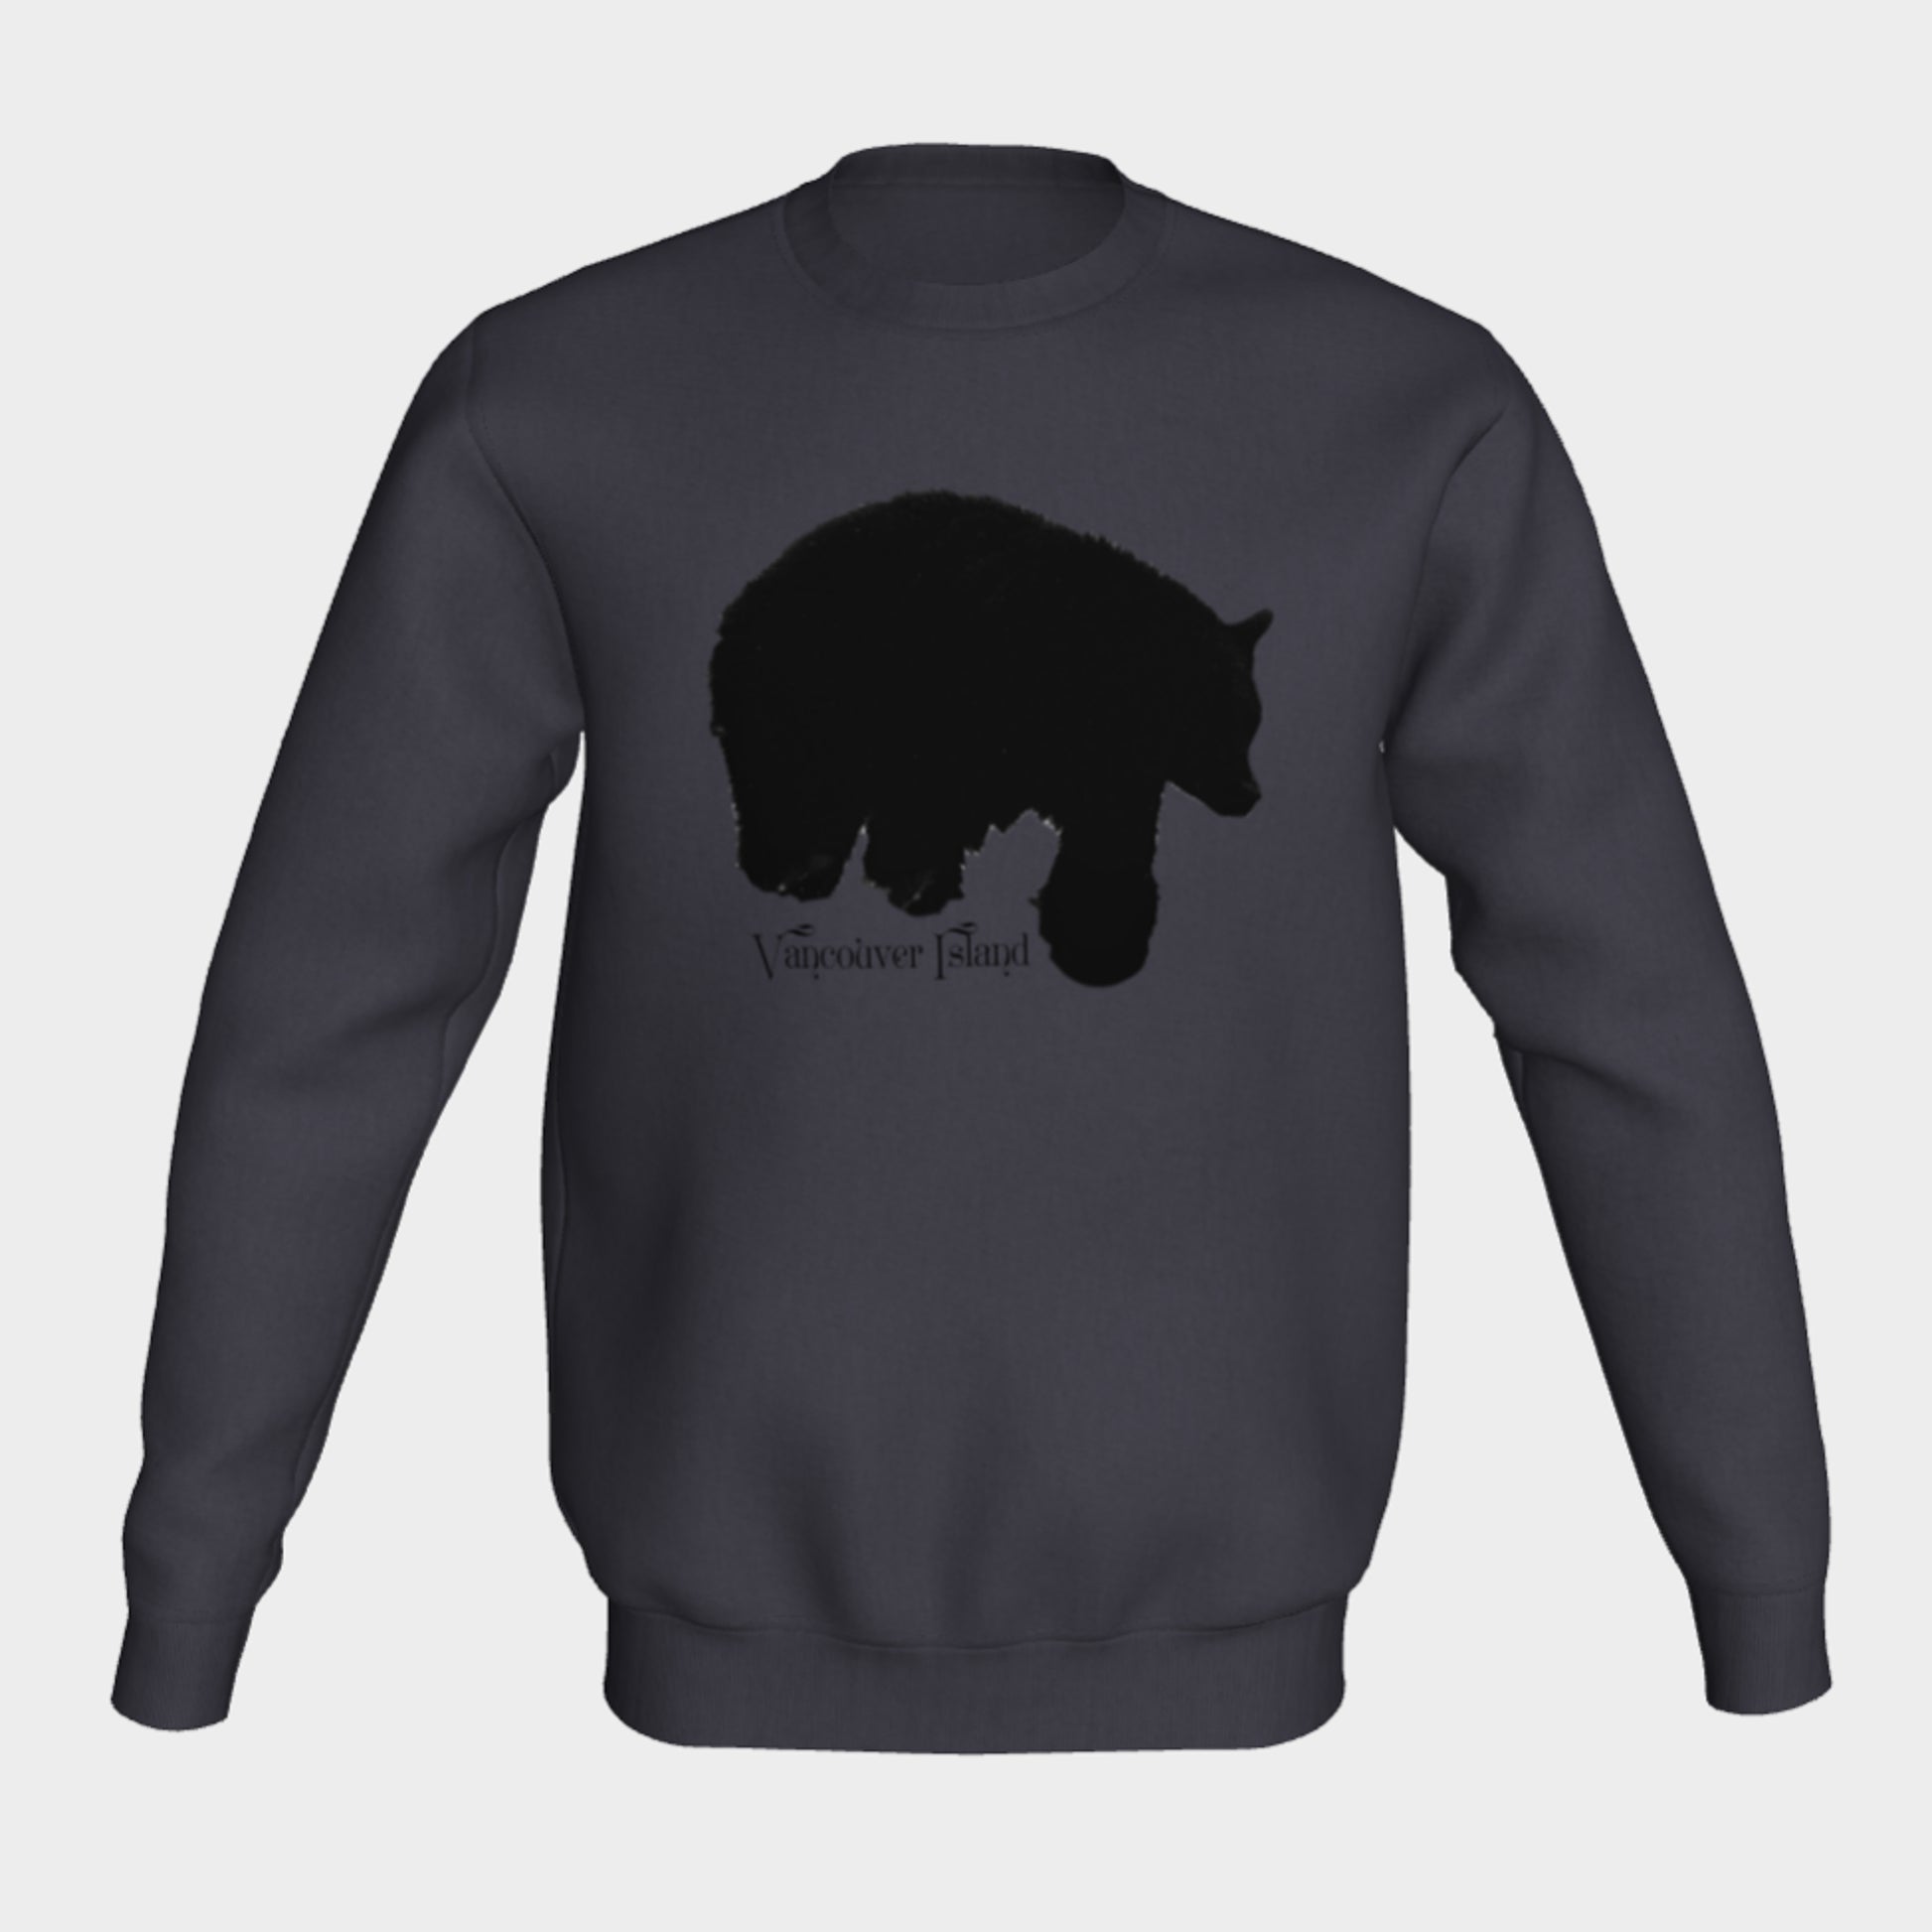 What’s better than a super cozy sweatshirt? A super cozy sweatshirt from Van Isle Goddess!  Super cozy unisex sweatshirt for those chilly days.  Excellent for men or women.   Fit is roomy and comfortable. 